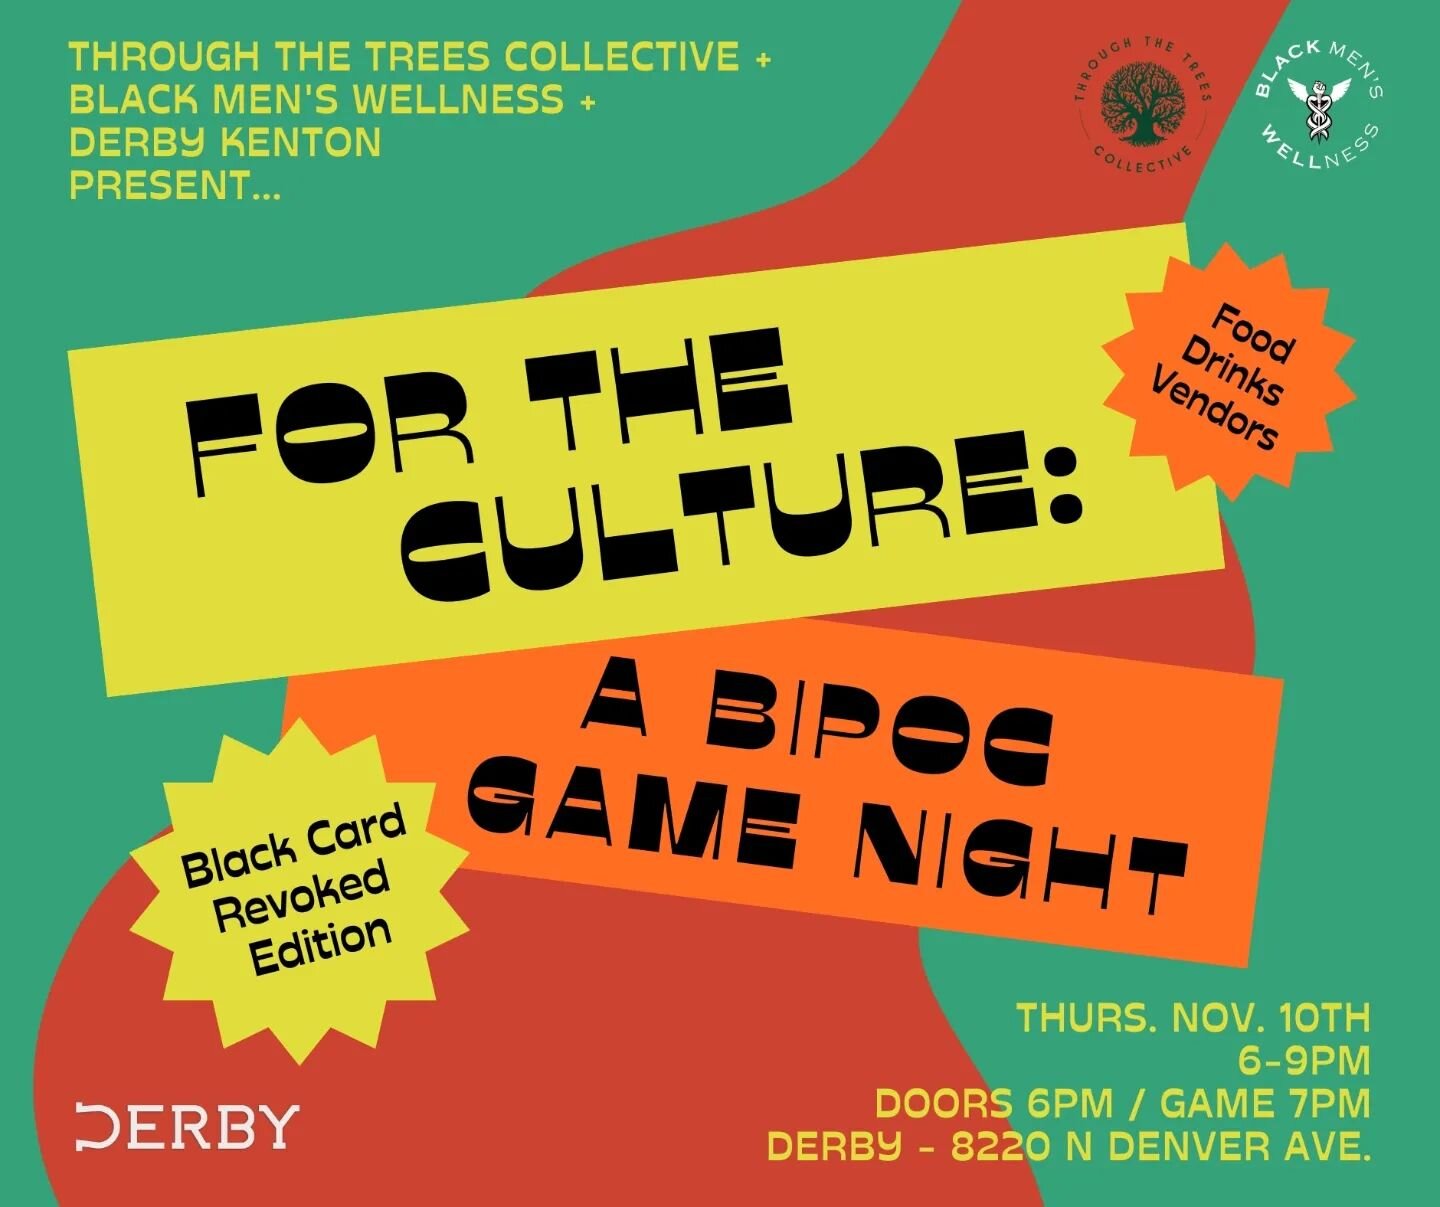 2 WEEKS FROM TODAY!

On Thursday, Nov. 10th come show up and show out at &ldquo;For the Culture: A BIPOC Game Night&rdquo; &ndash; Black Card Revoked Edition! (FREE)

✨️ This Event is presented by @throughthetreescollective @blackmenswellnesspdx and